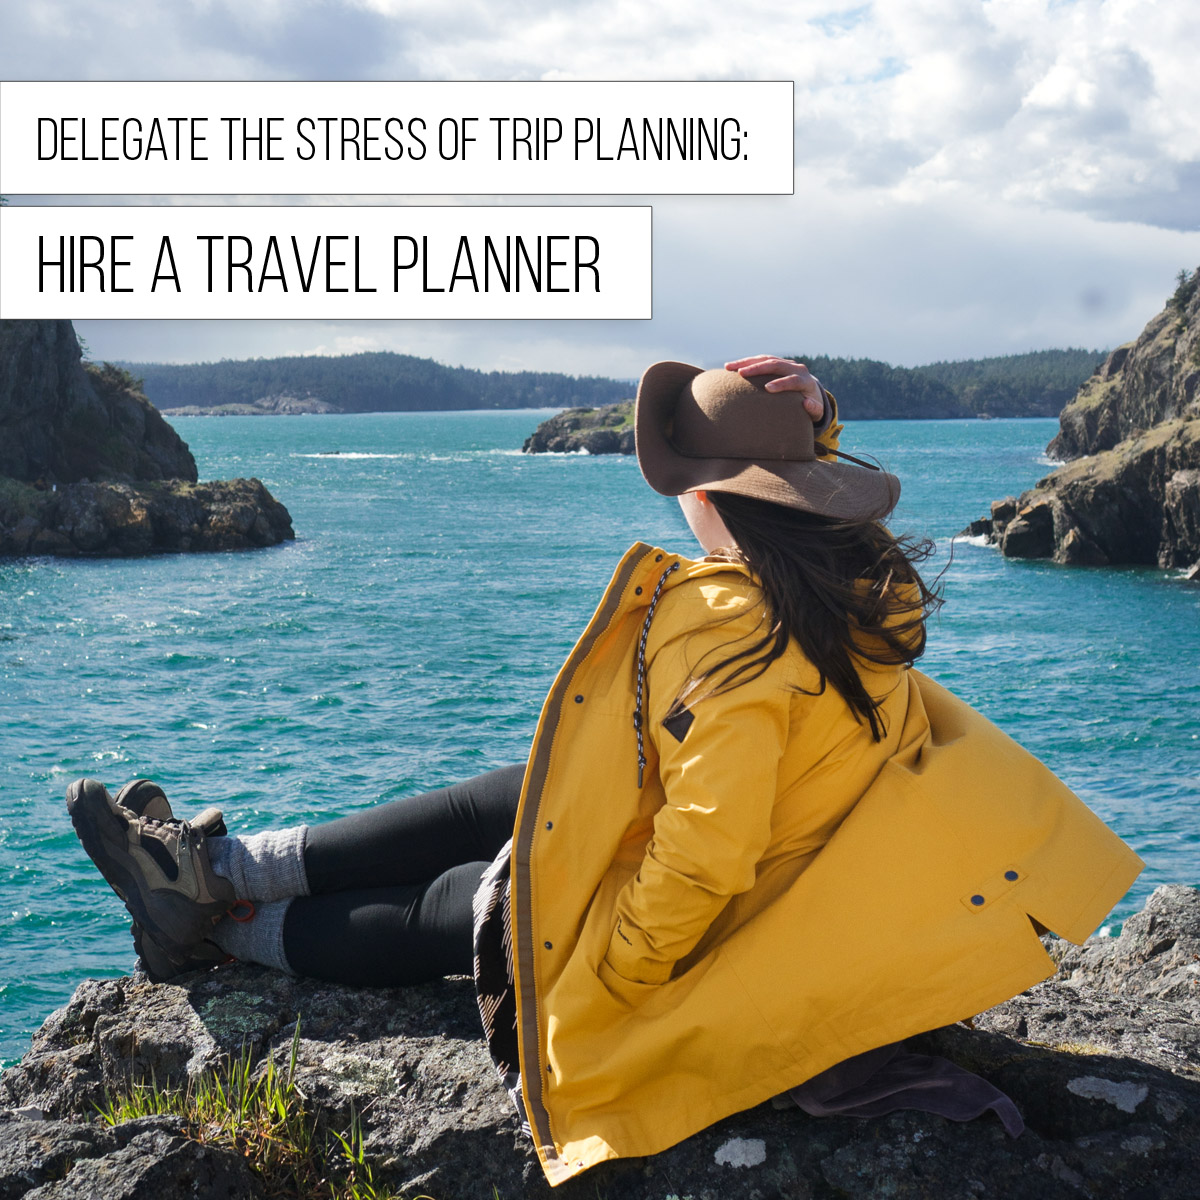 Book a personal travel planner and get a custom trip itinerary